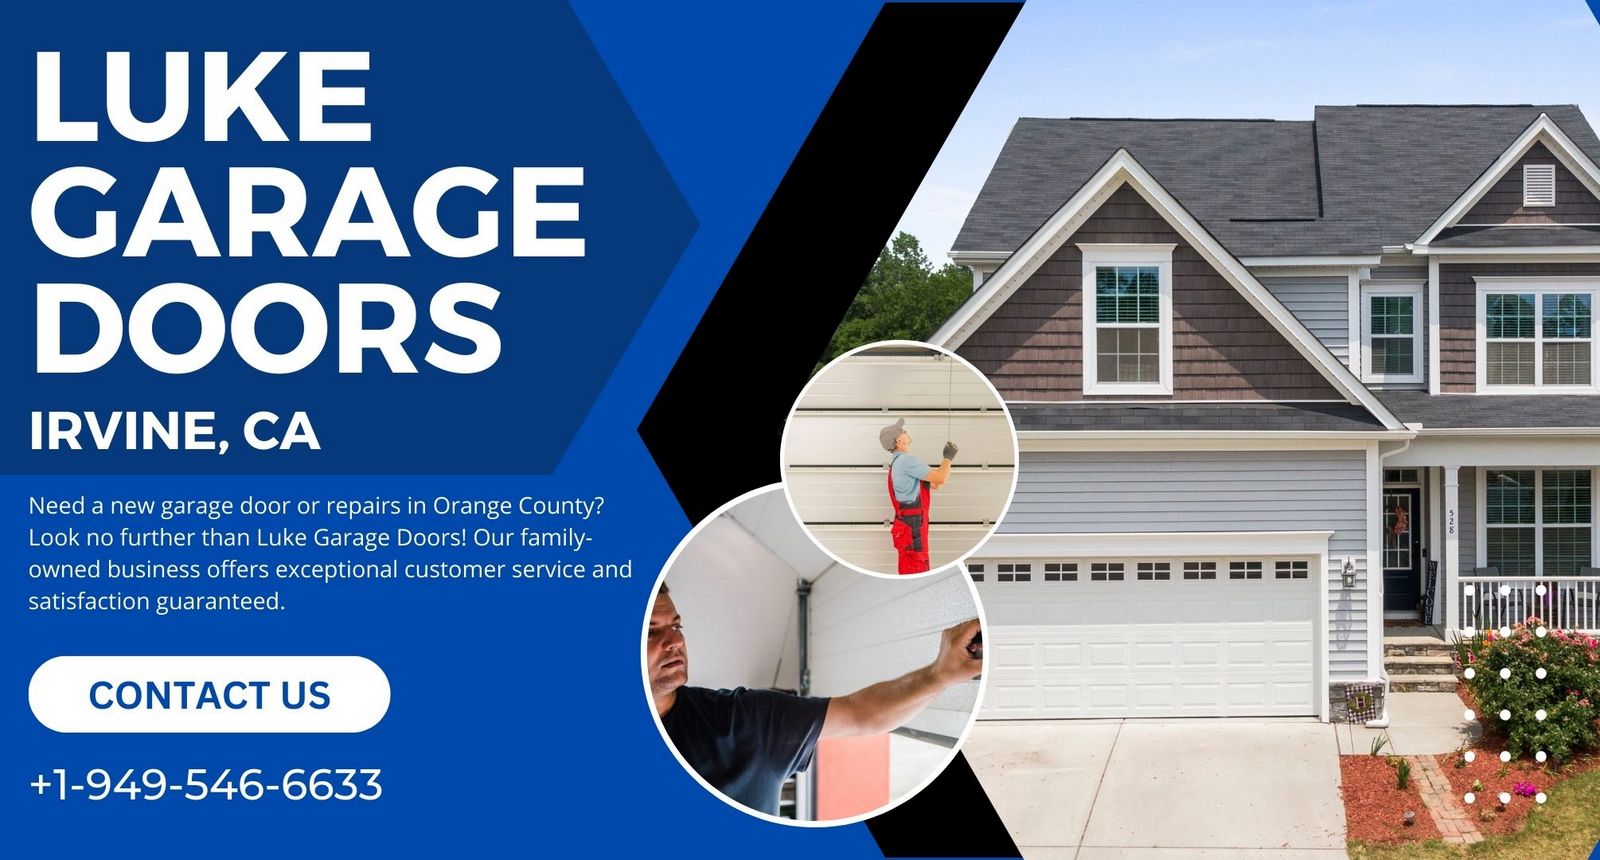 Trust the experts at Luke Garage Doors for all your residential or commercial garage door needs in Irvine, CA. Enjoy transparent pricing, honest advice, and professional expertise that puts your mind at ease. Contact us today!